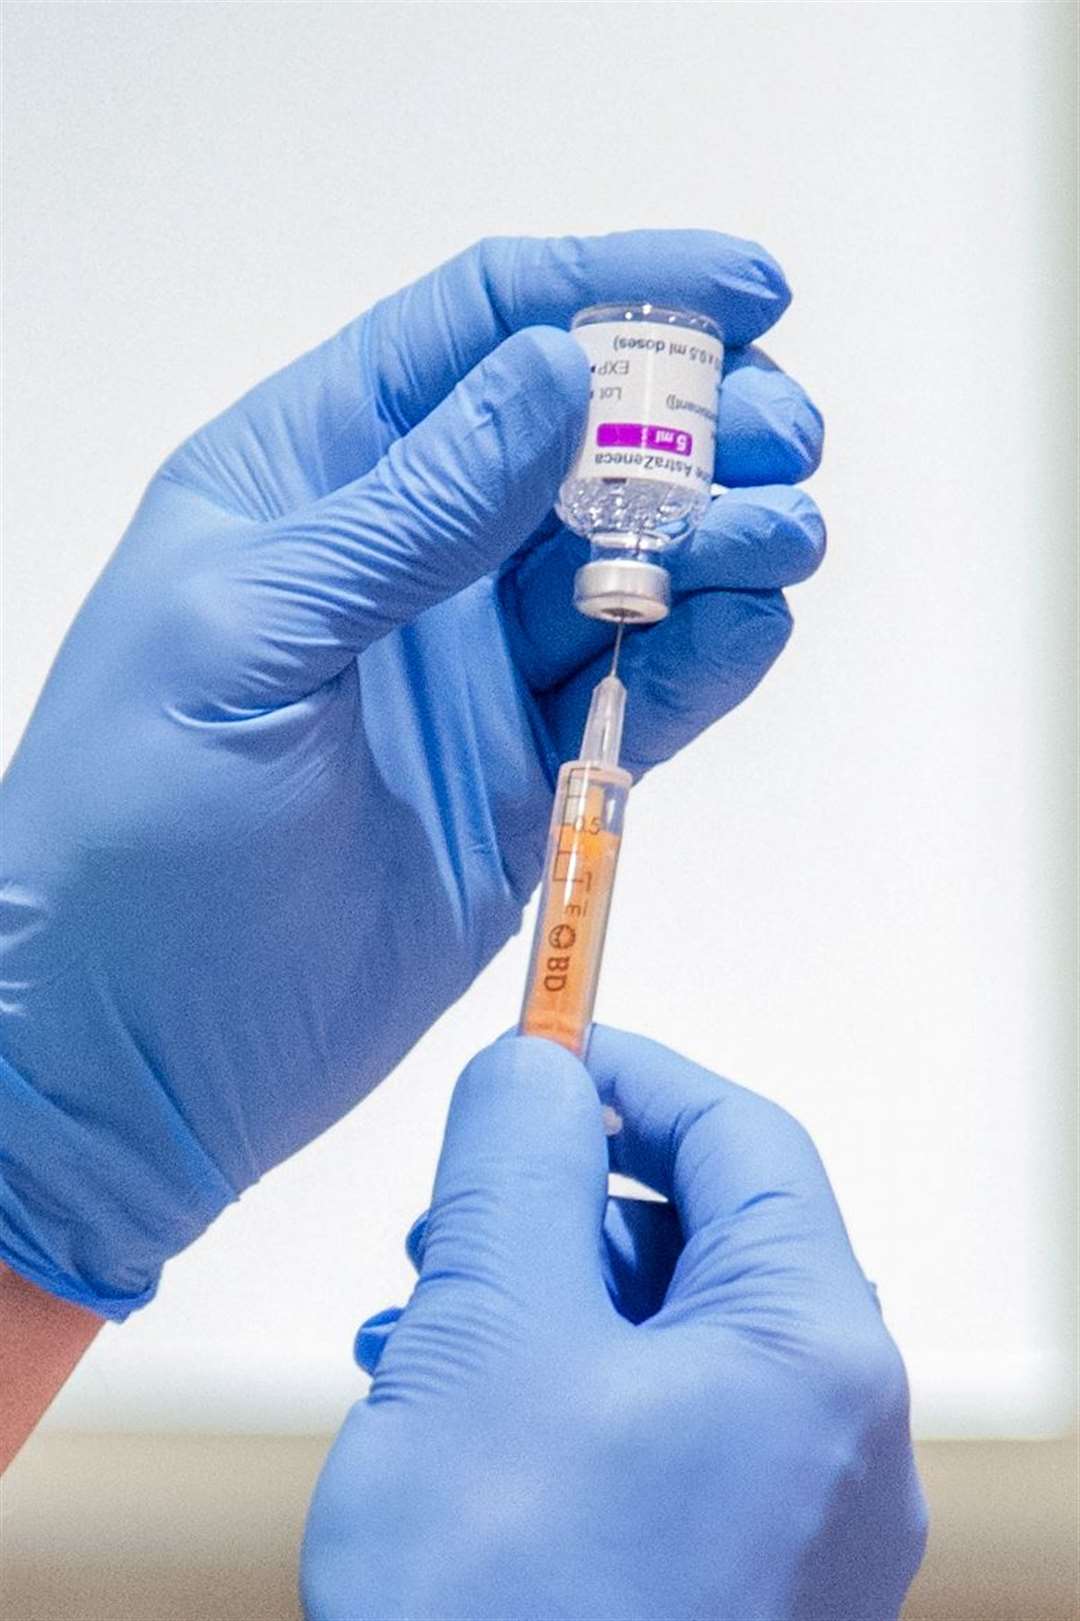 More than 100,000 people in the NHS Highland area had received their first dose of Covid-19 vaccine by the end of last week. Picture: Daniel Forsyth